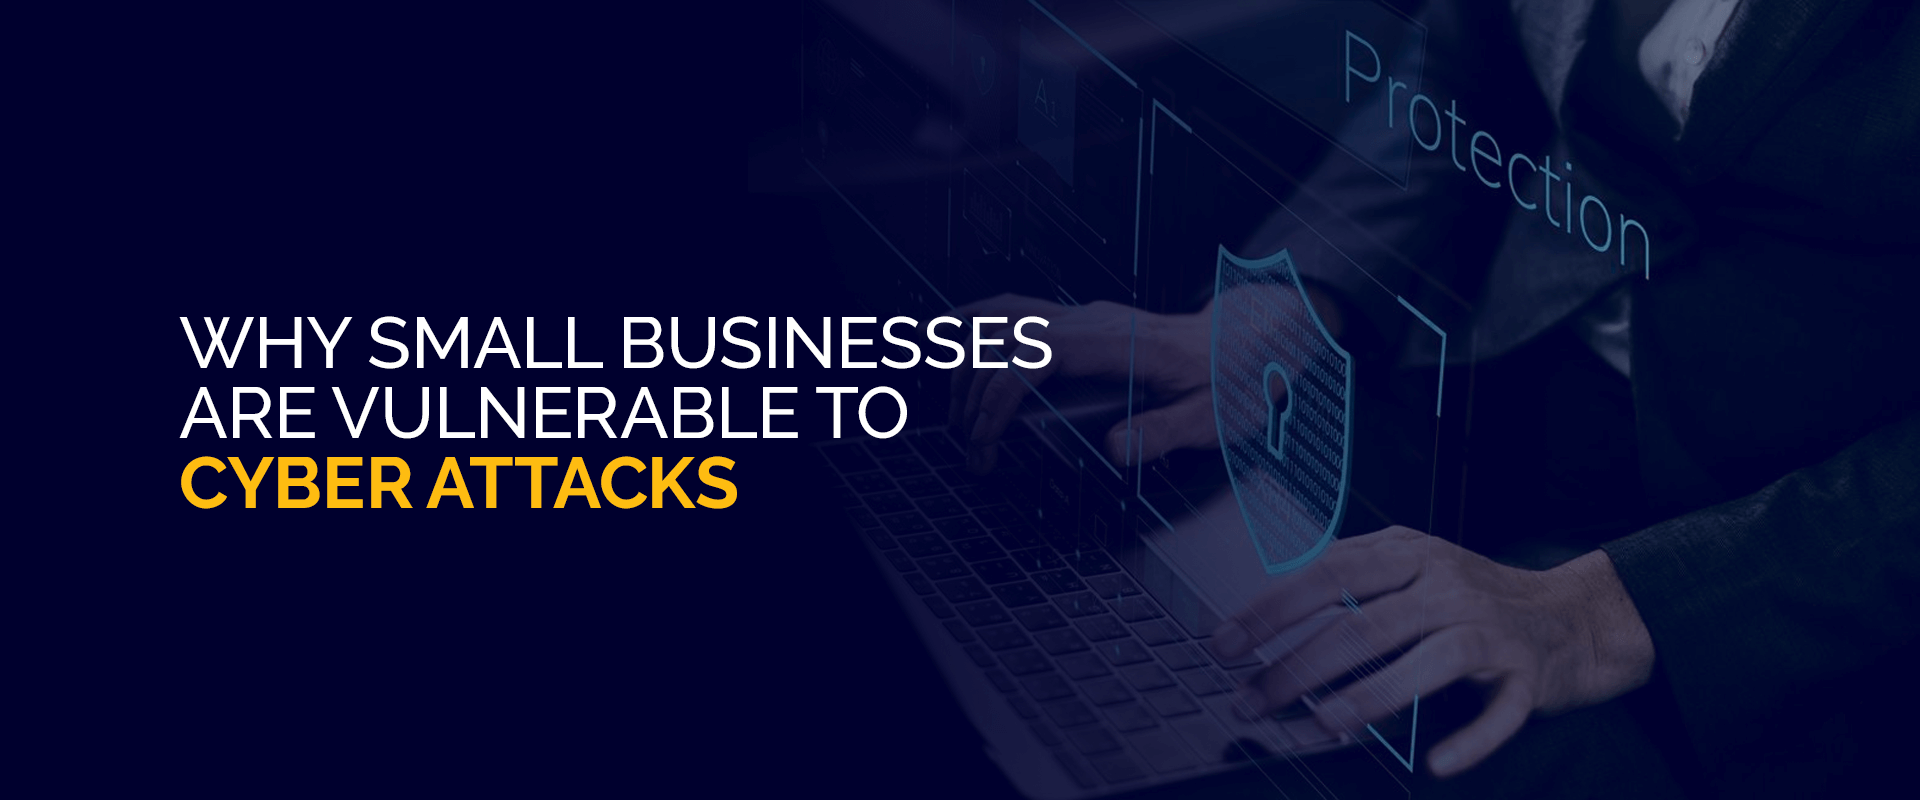 Why Small Businesses Are Vulnerable to Cyber Attacks